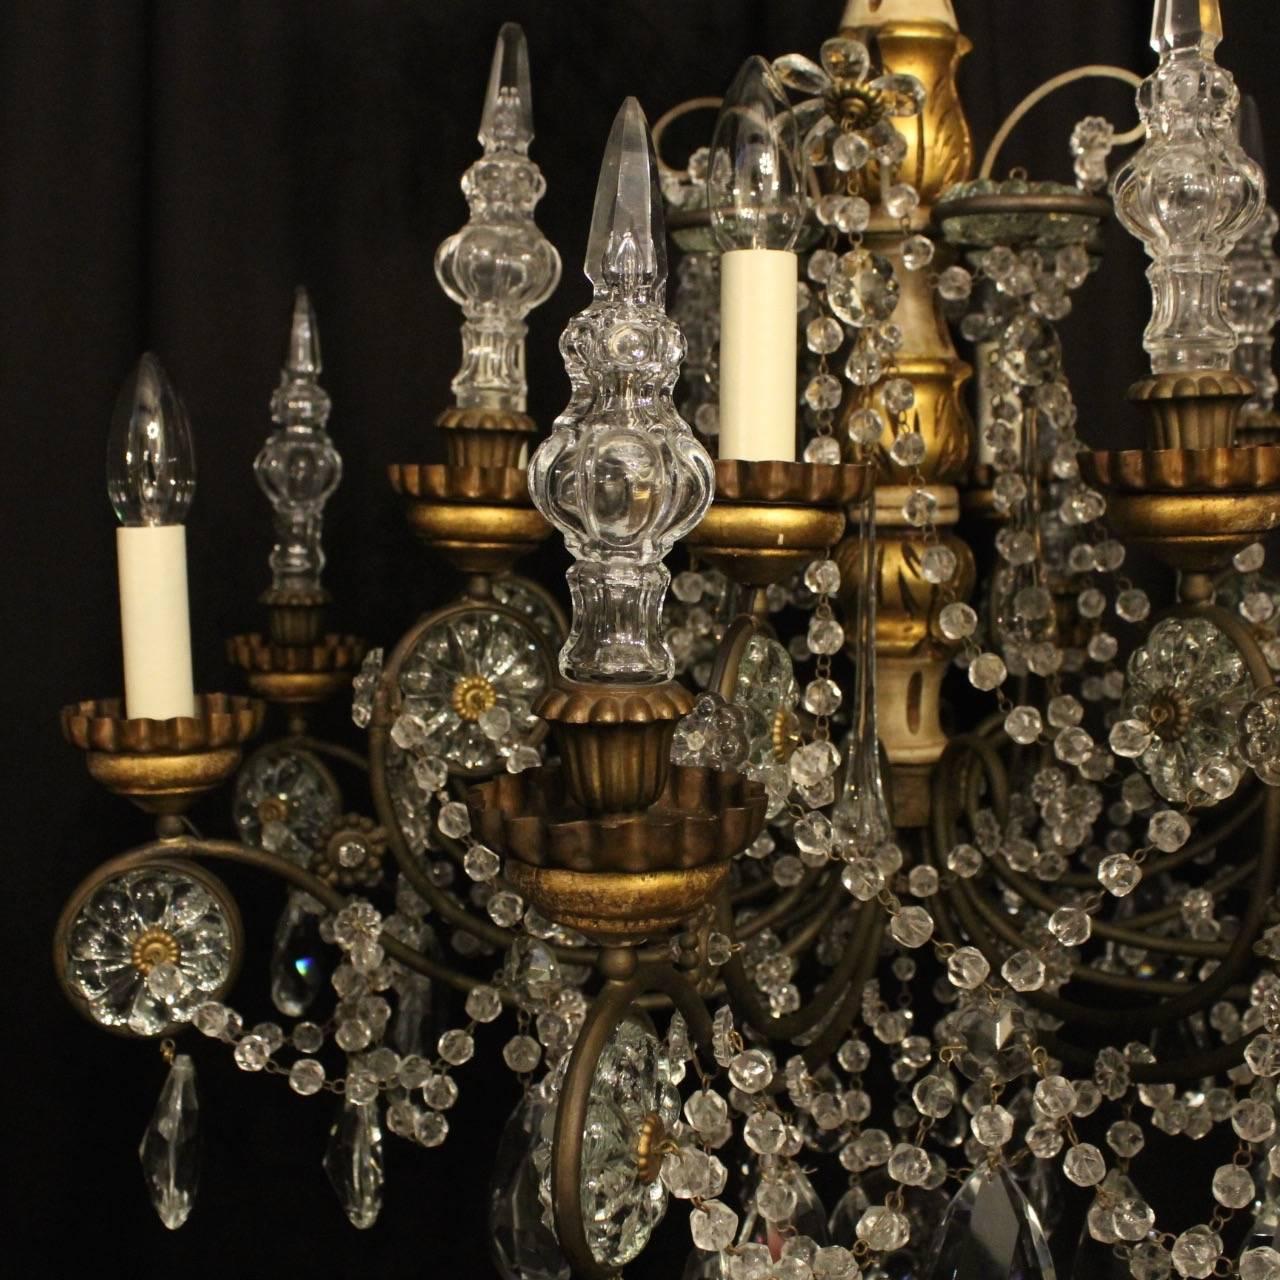 A decorative Italian giltwood, oxidized cast brass and crystal eight light double tiered antique chandelier, the scrolling arms with encased central floral prisms and wooden piecrust bobeche drip pans, issuing from a painted and gilded carved wooden